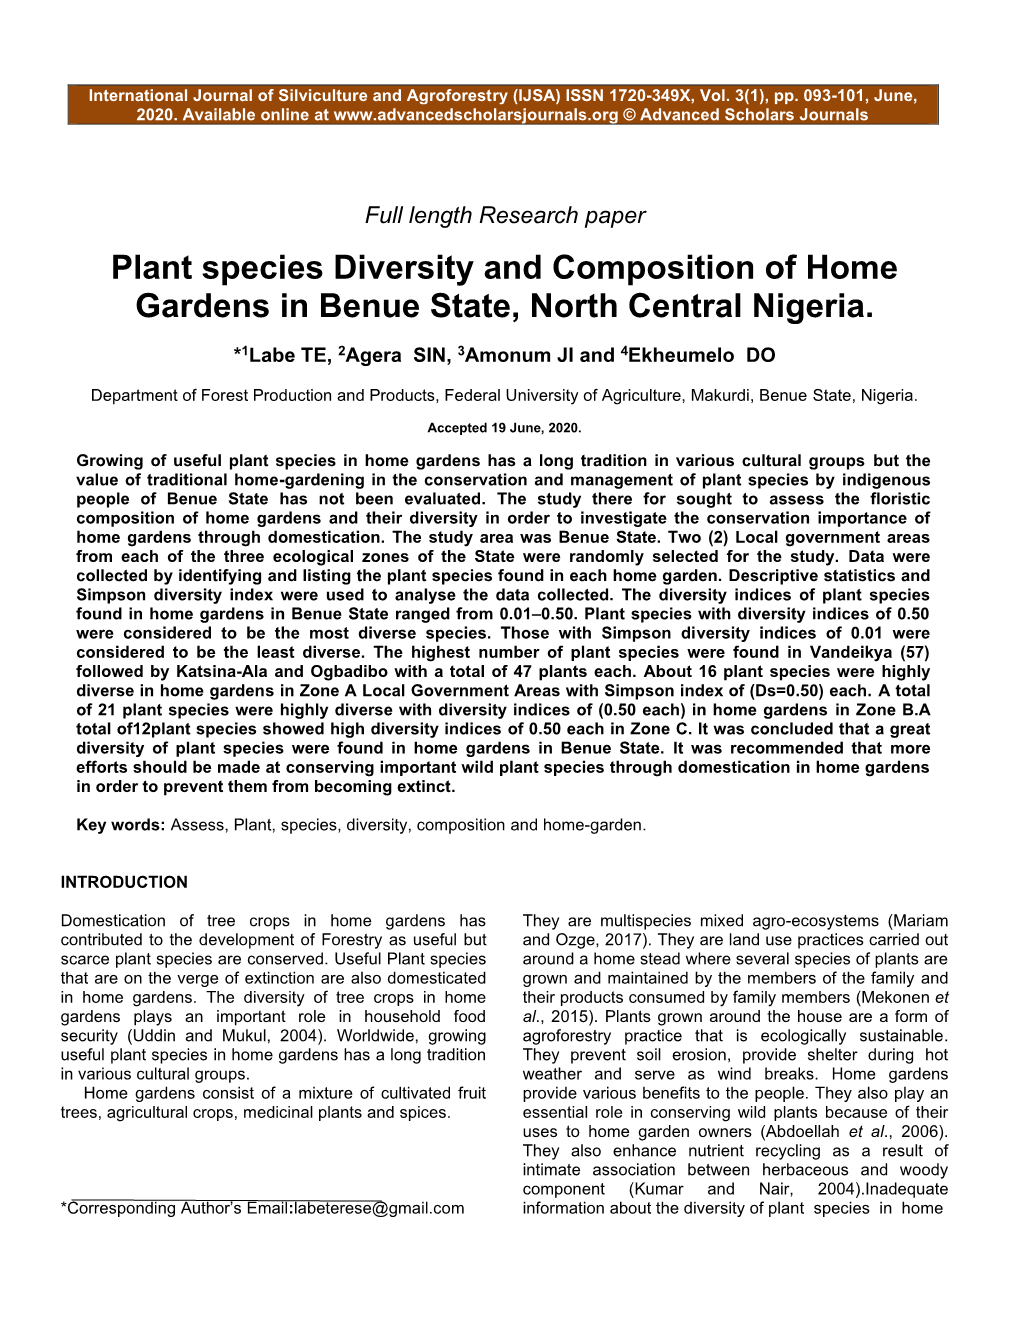 Plant Species Diversity and Composition of Home Gardens in Benue State, North Central Nigeria